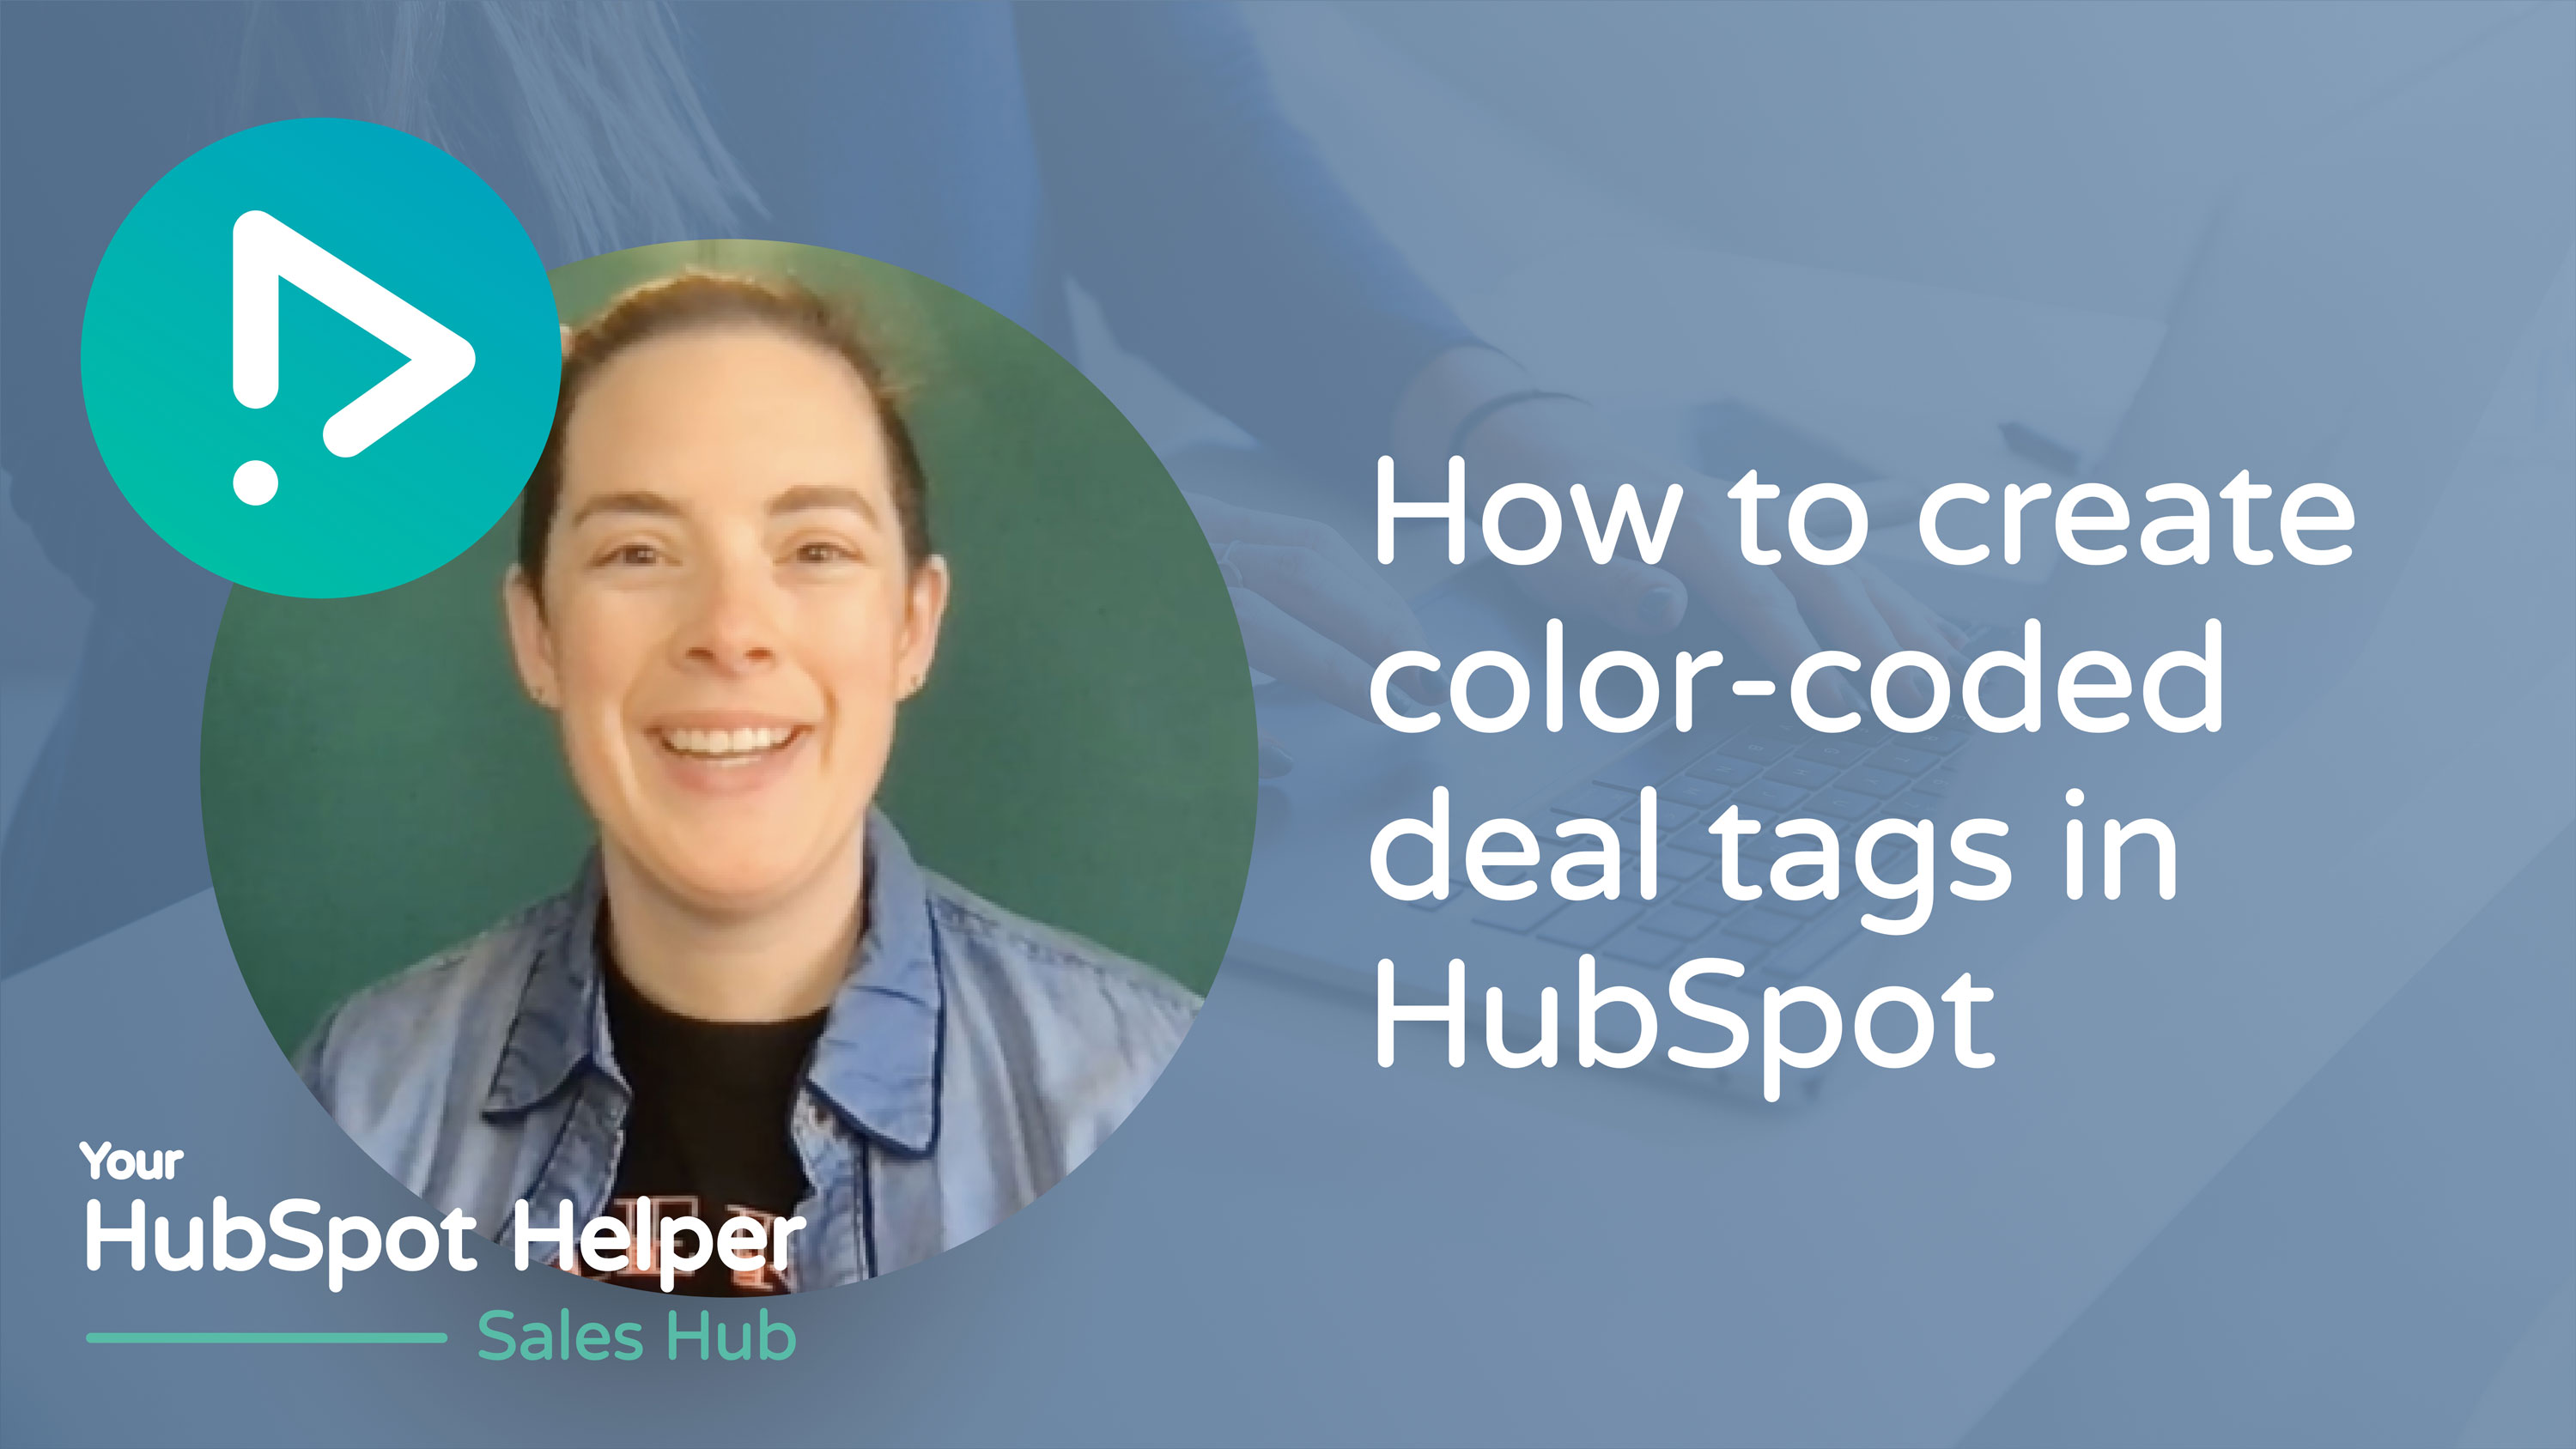 How to create color-coded deal tags in HubSpot